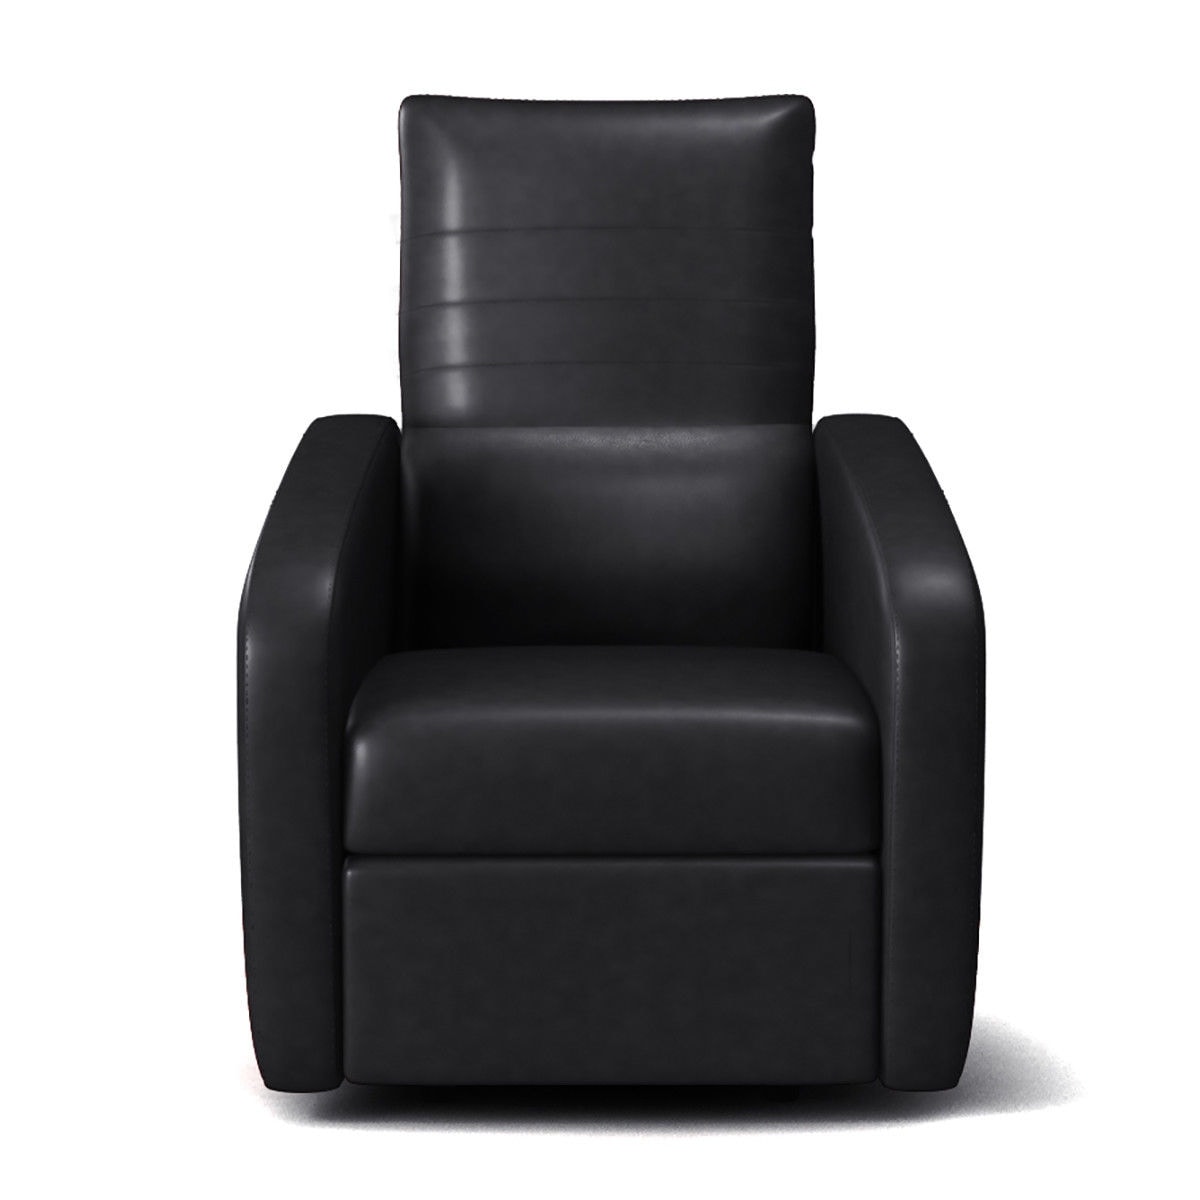 Shop Costway Manual Recliner Chair Contemporary Foldable Back Leather On Sale Overstock 20708456